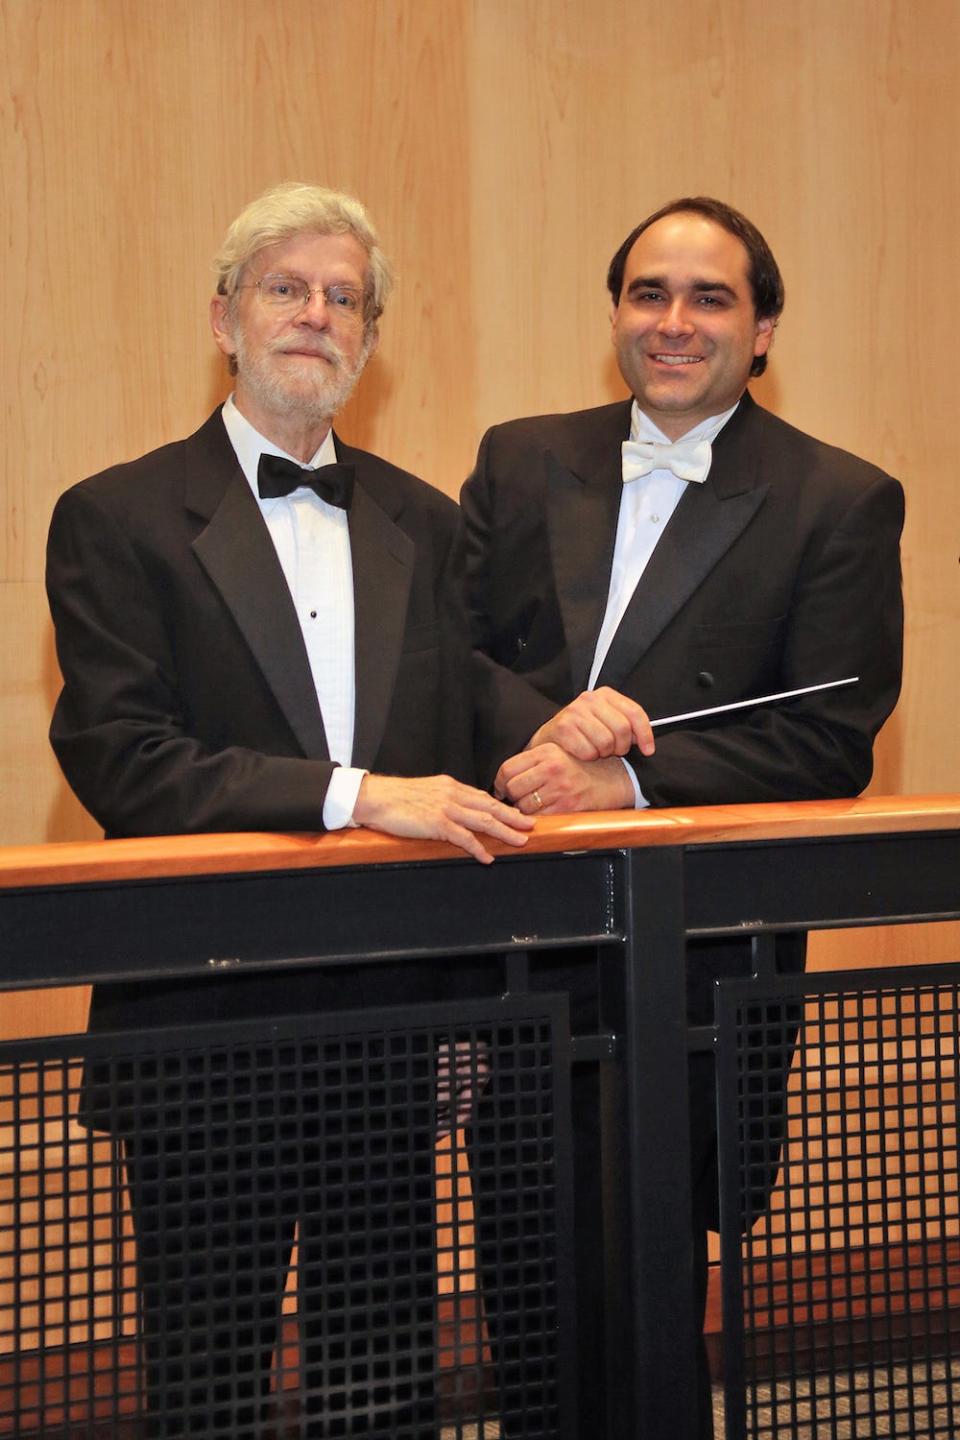 Accompanist Donald Enos, left, and Music Director Joe Marchio will be part of a "Let Music Live!" concert by the Chatham Chorale.